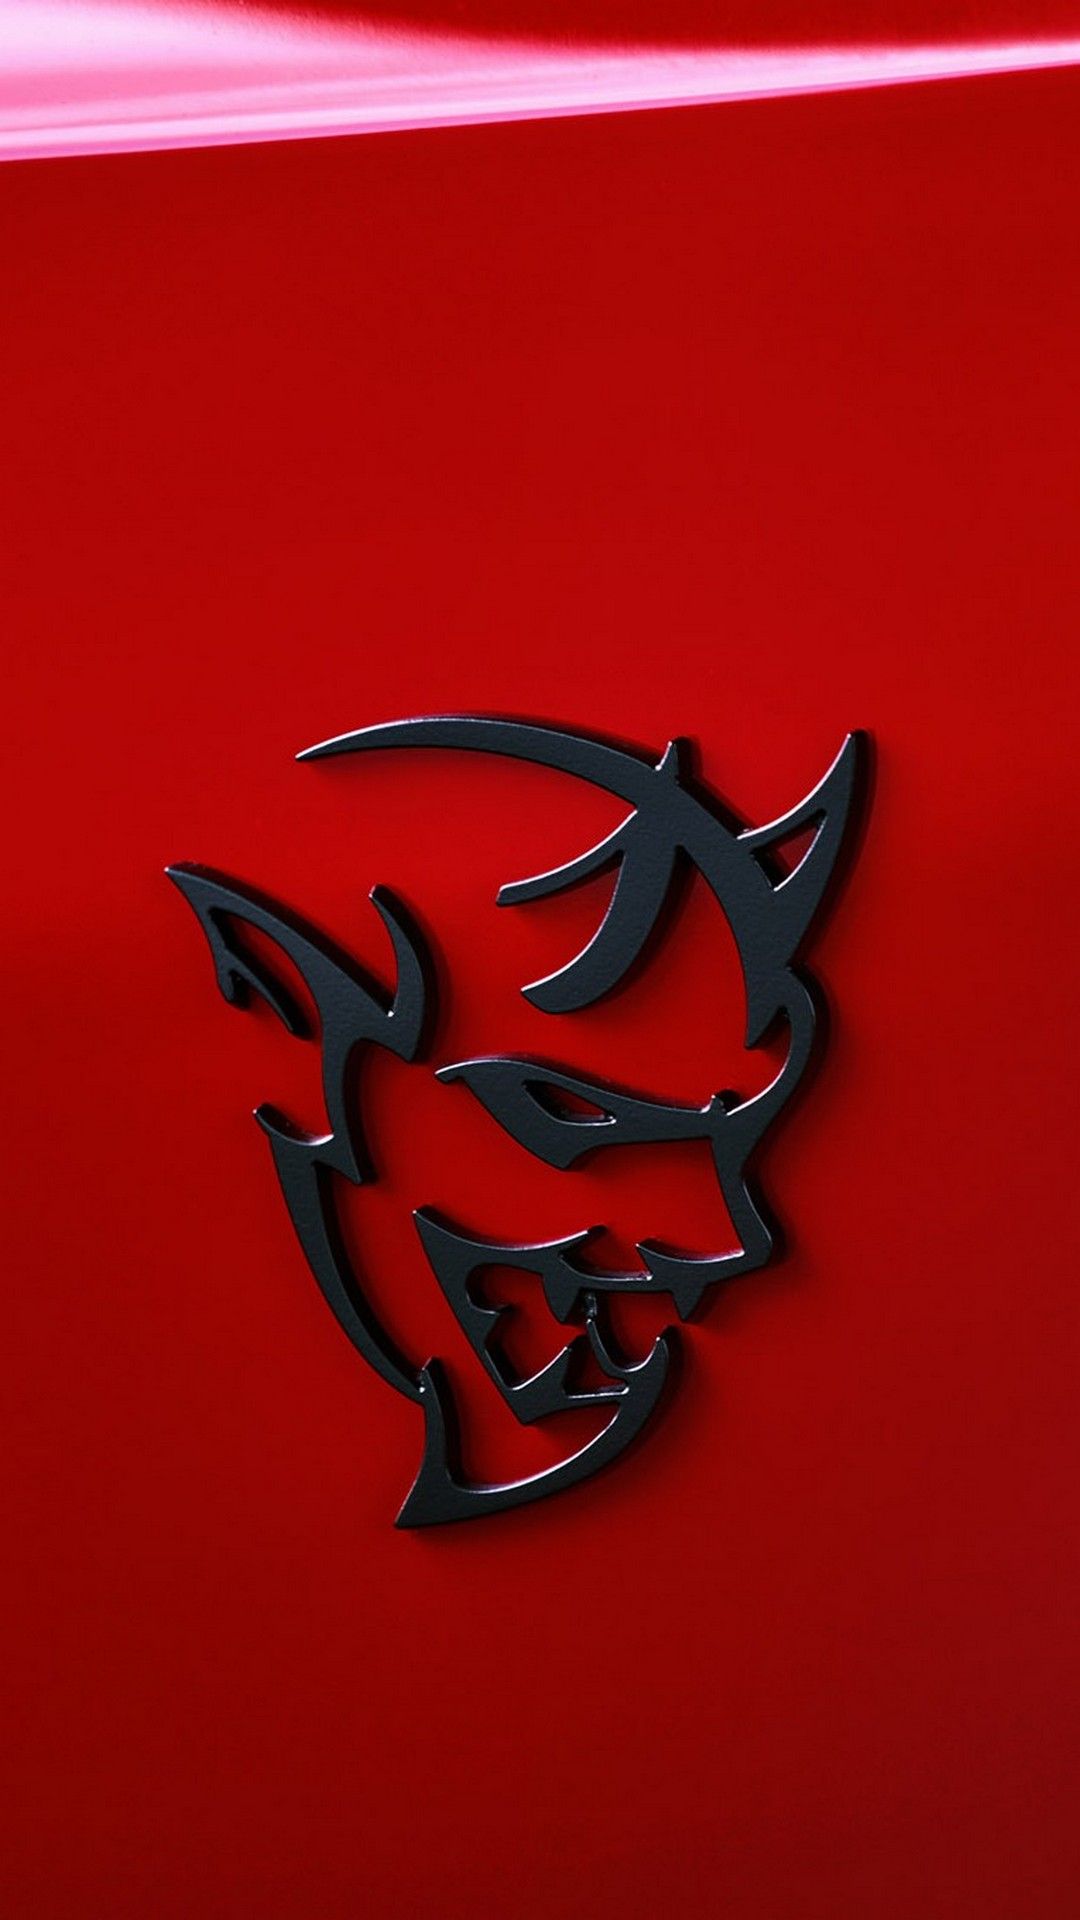 Free download Hellcat Logo Wallpaper 42 image collections of wallpapers  1080x1920 for your Desktop Mobile  Tablet  Explore 25 Dodge Hellcat  Logo Wallpapers  Dodge Charger Hellcat Wallpaper Dodge Challenger Hellcat